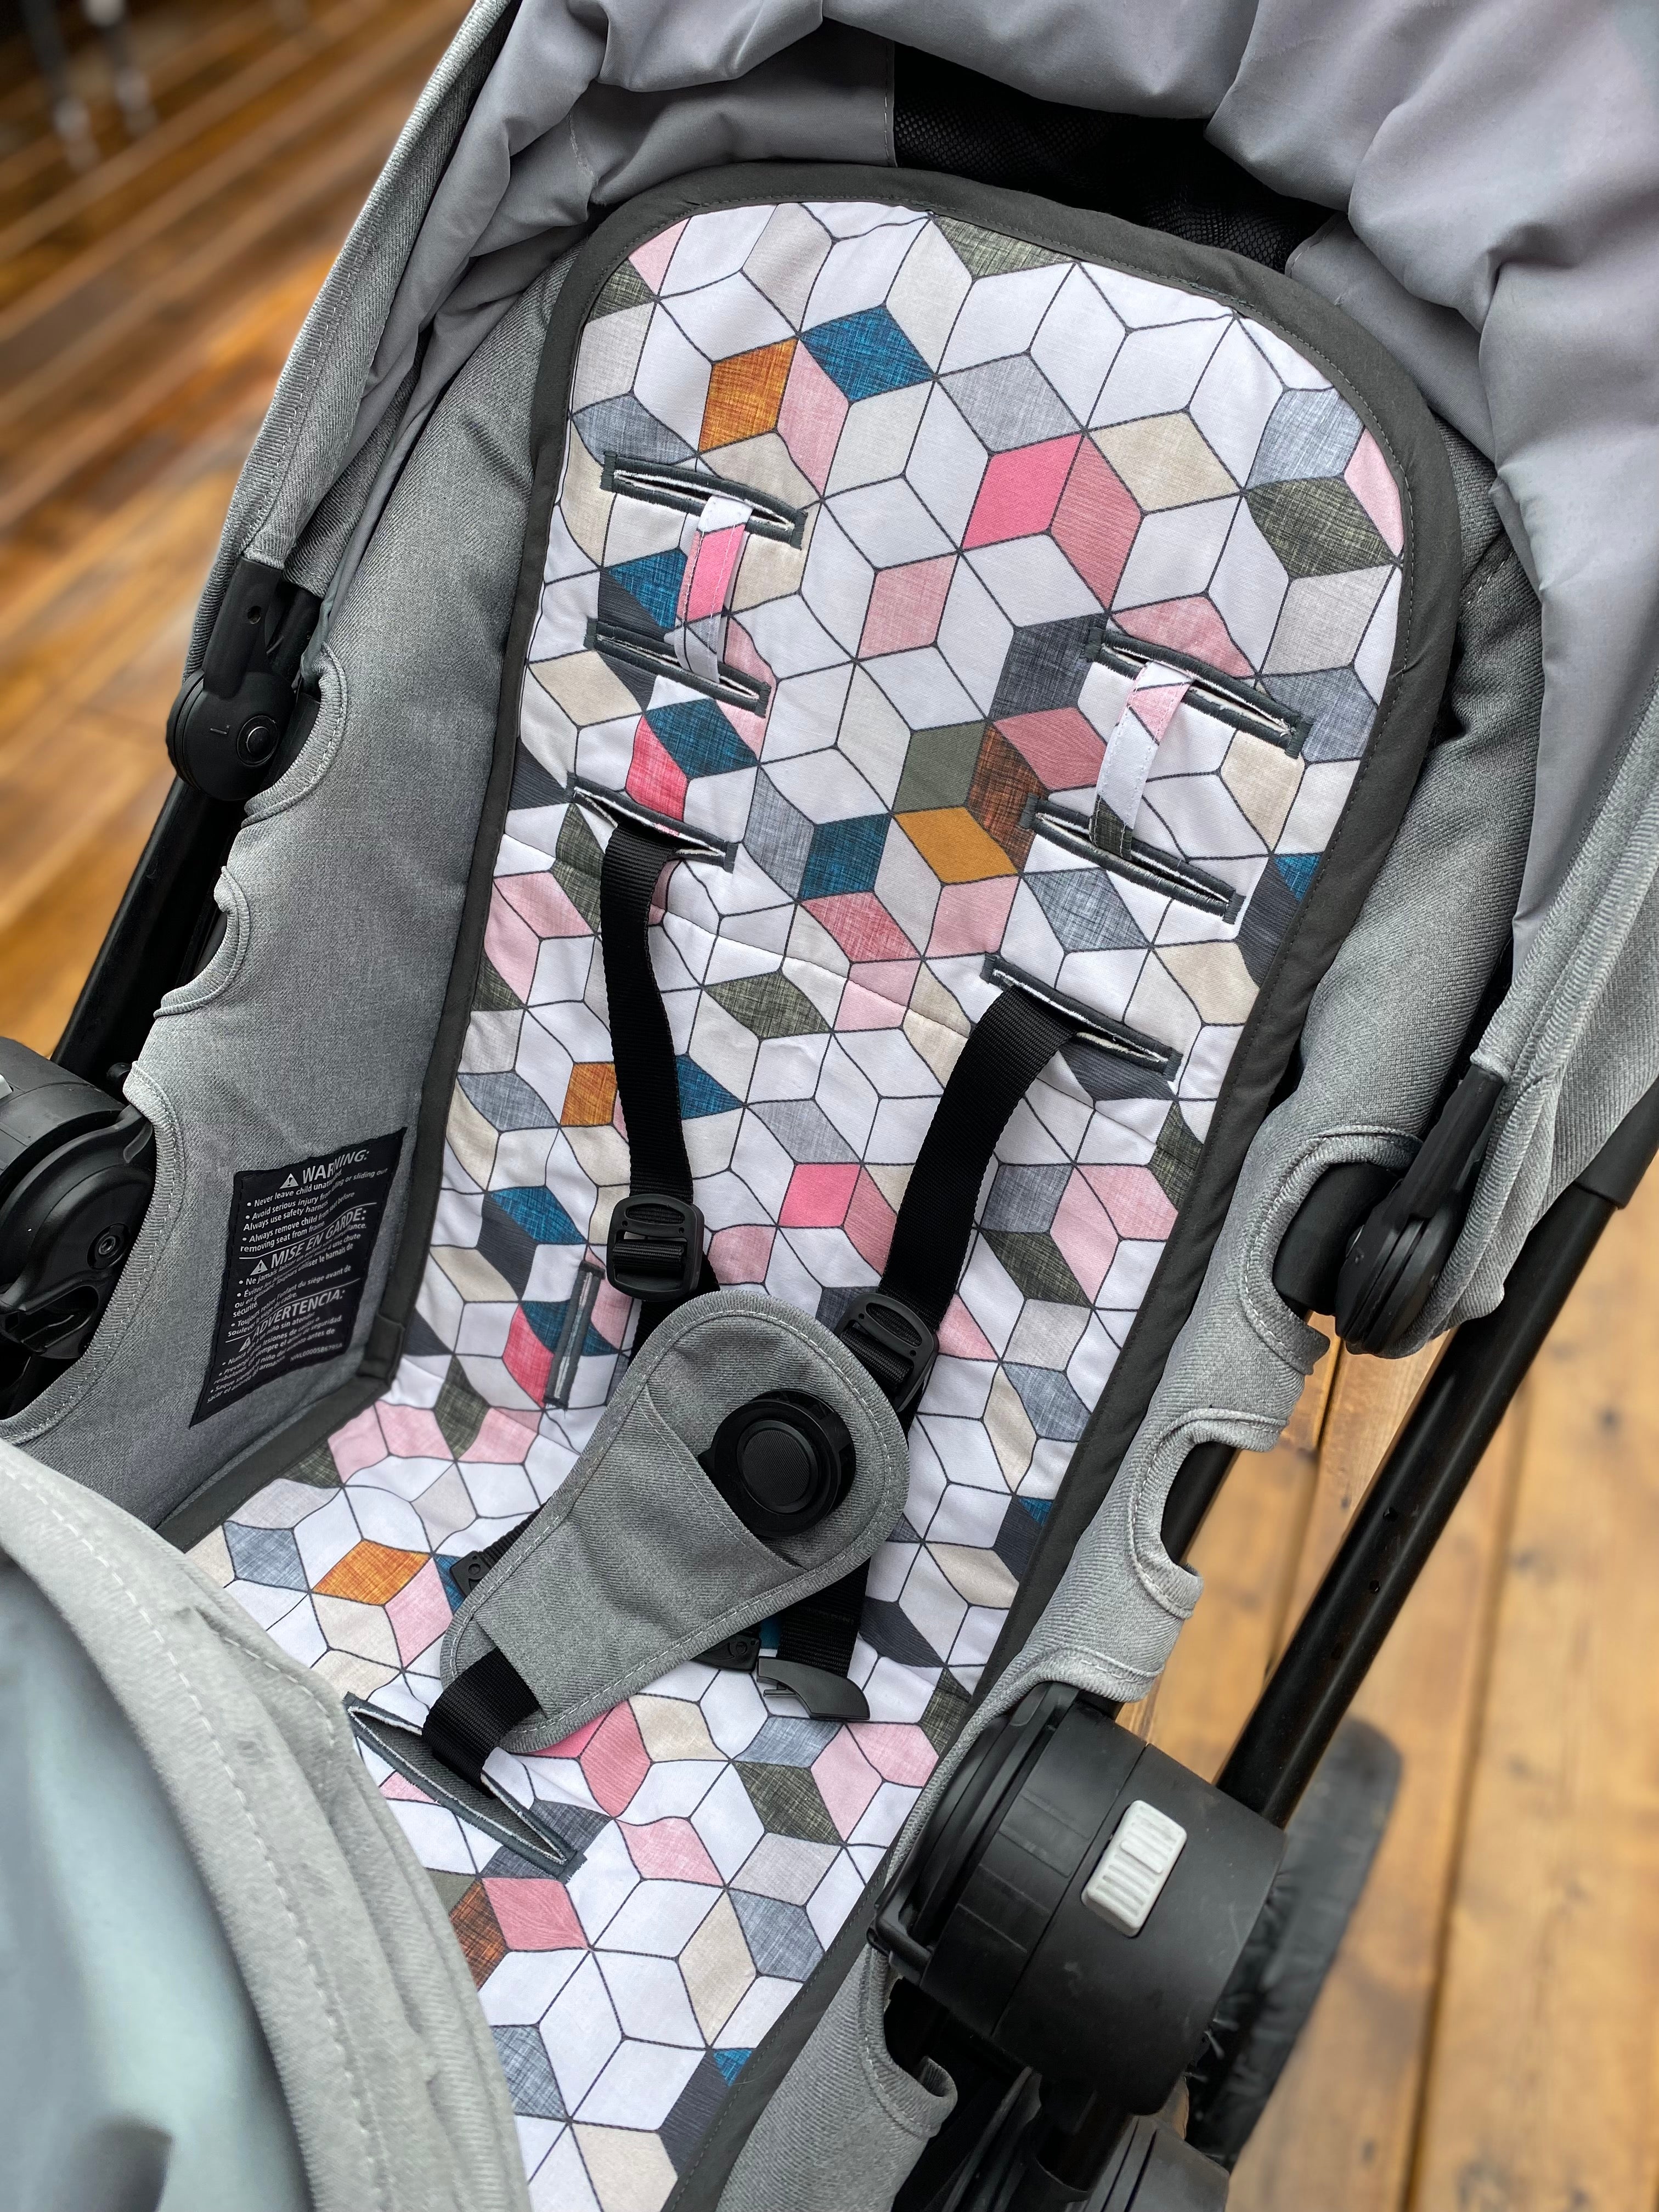 Stroller liner and foormuff set made to fit most strollers. Get a custom fit for a wide variety of strollers. These save your seat from wear and tear. This one is featured in the pink hex print.